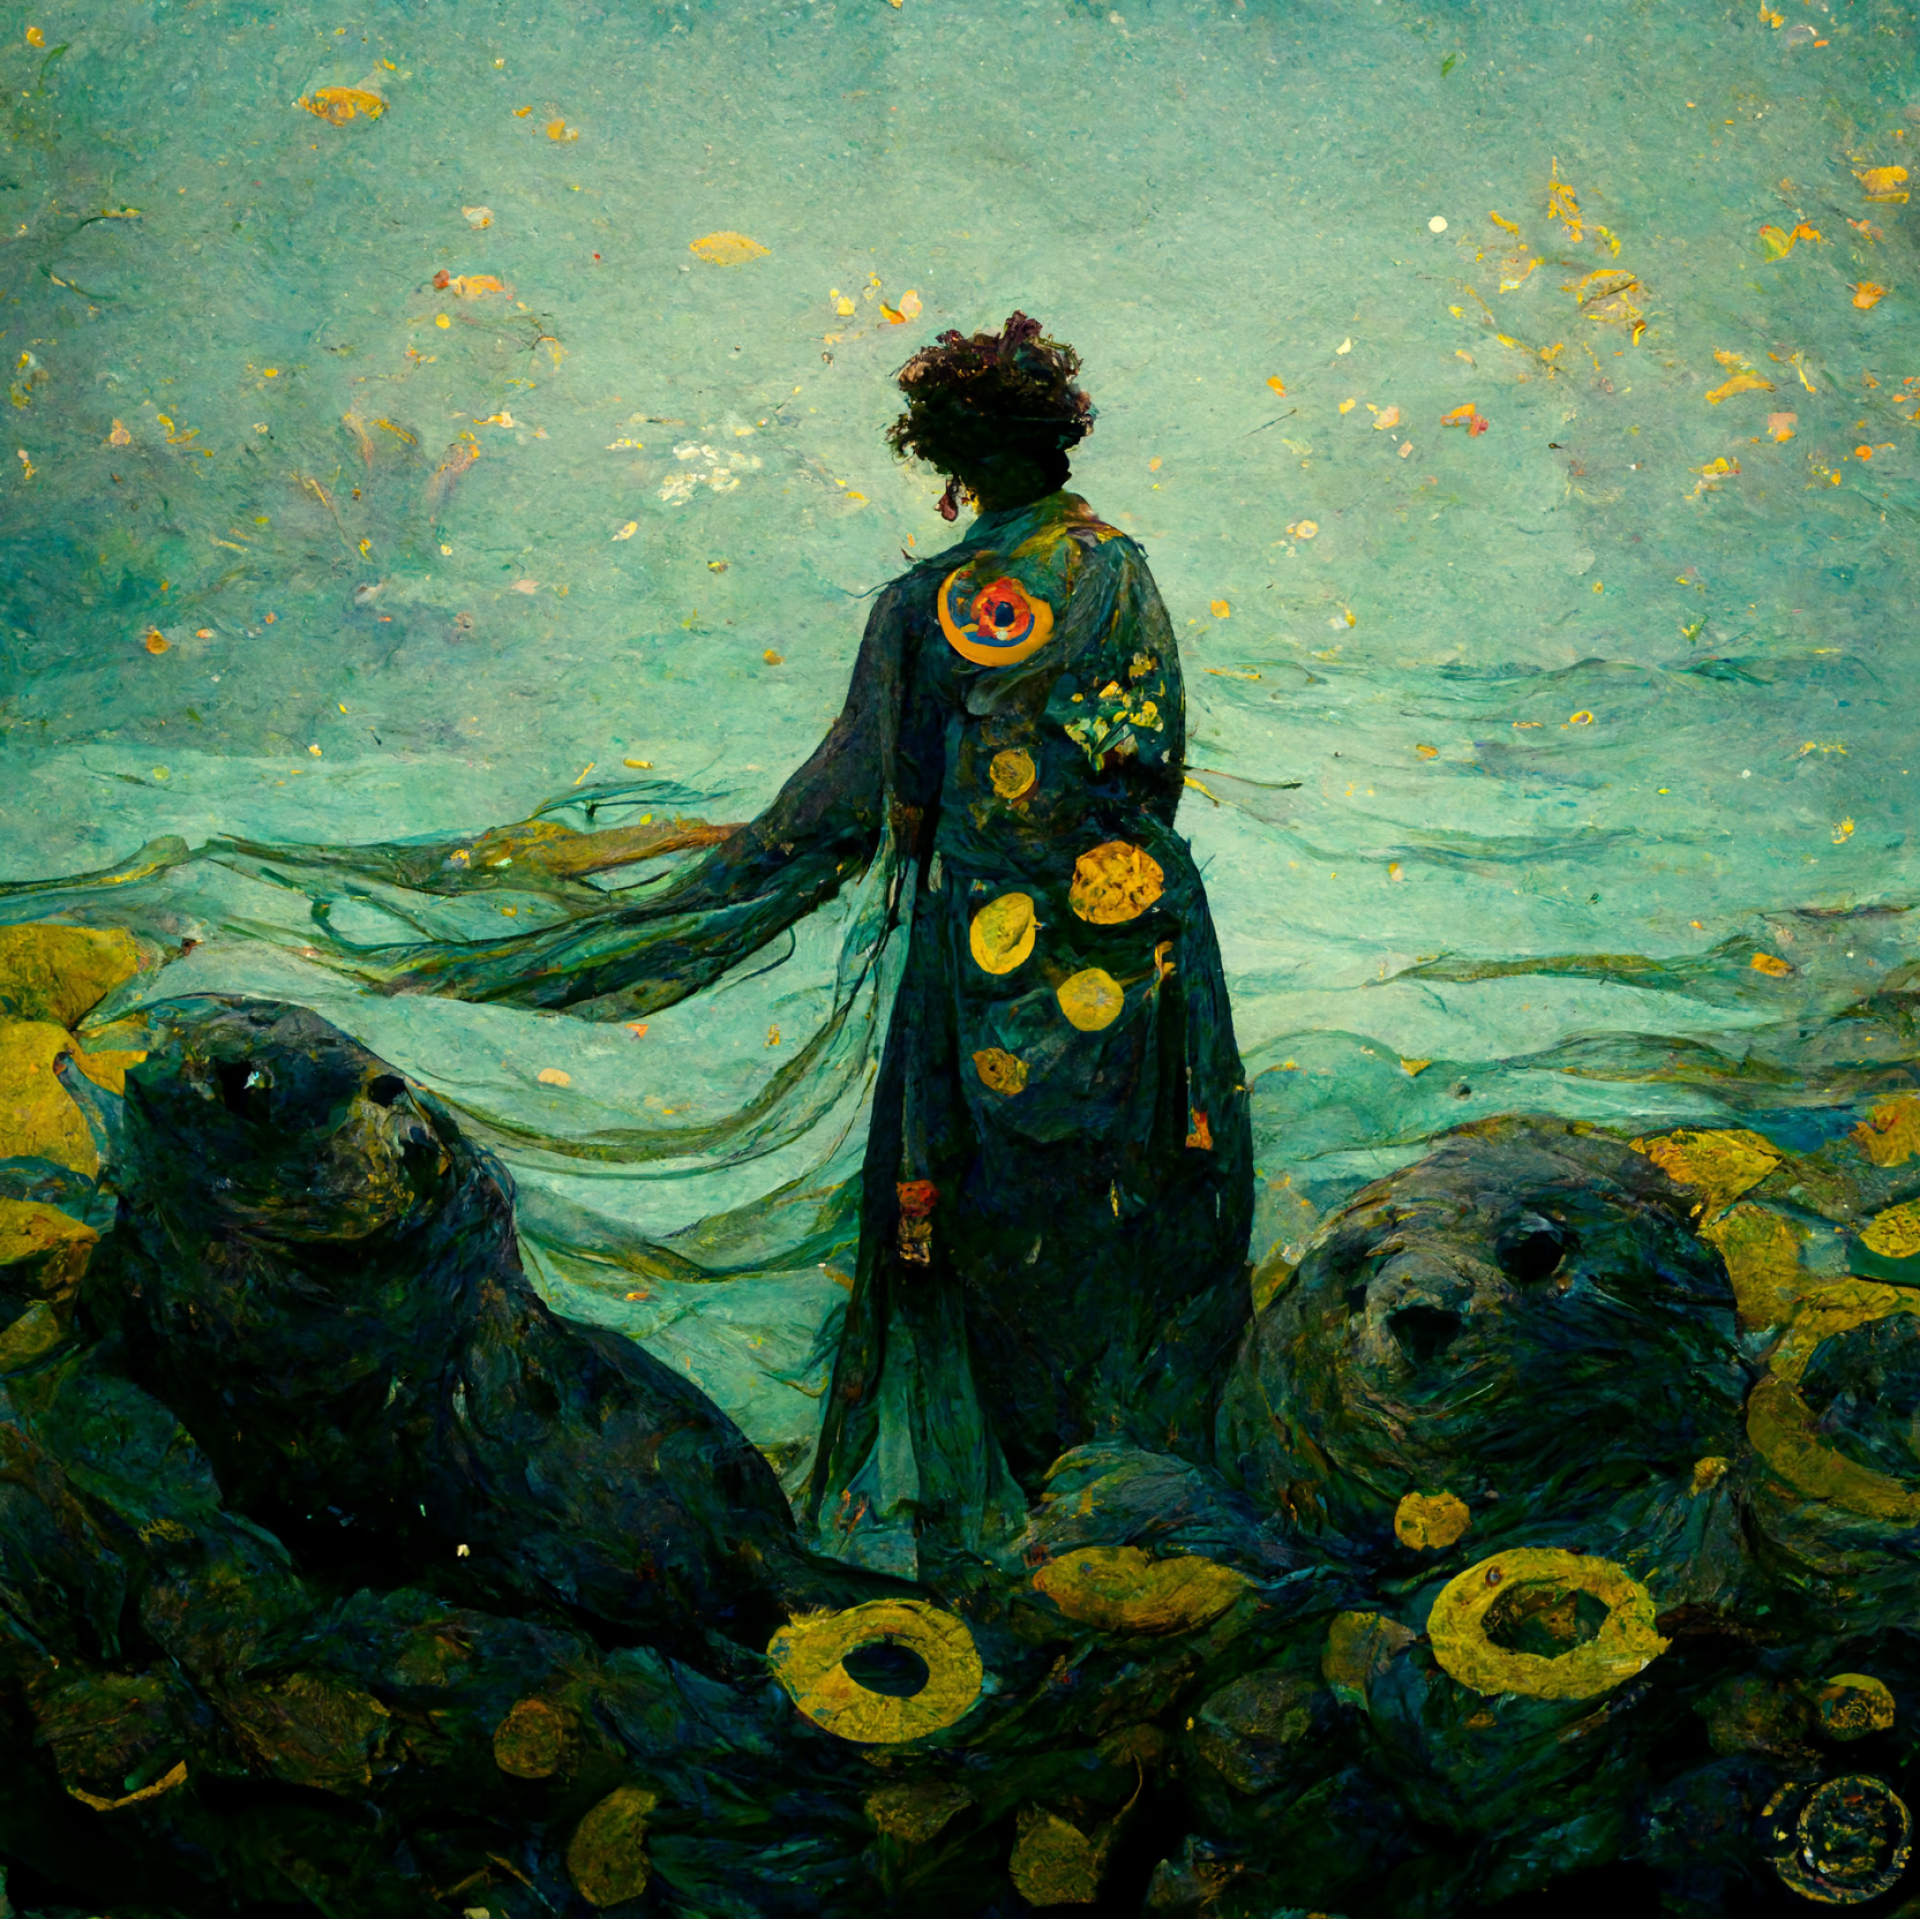 AI-generated image from Midjourney, the Faroe Islands inspired by Klimt.